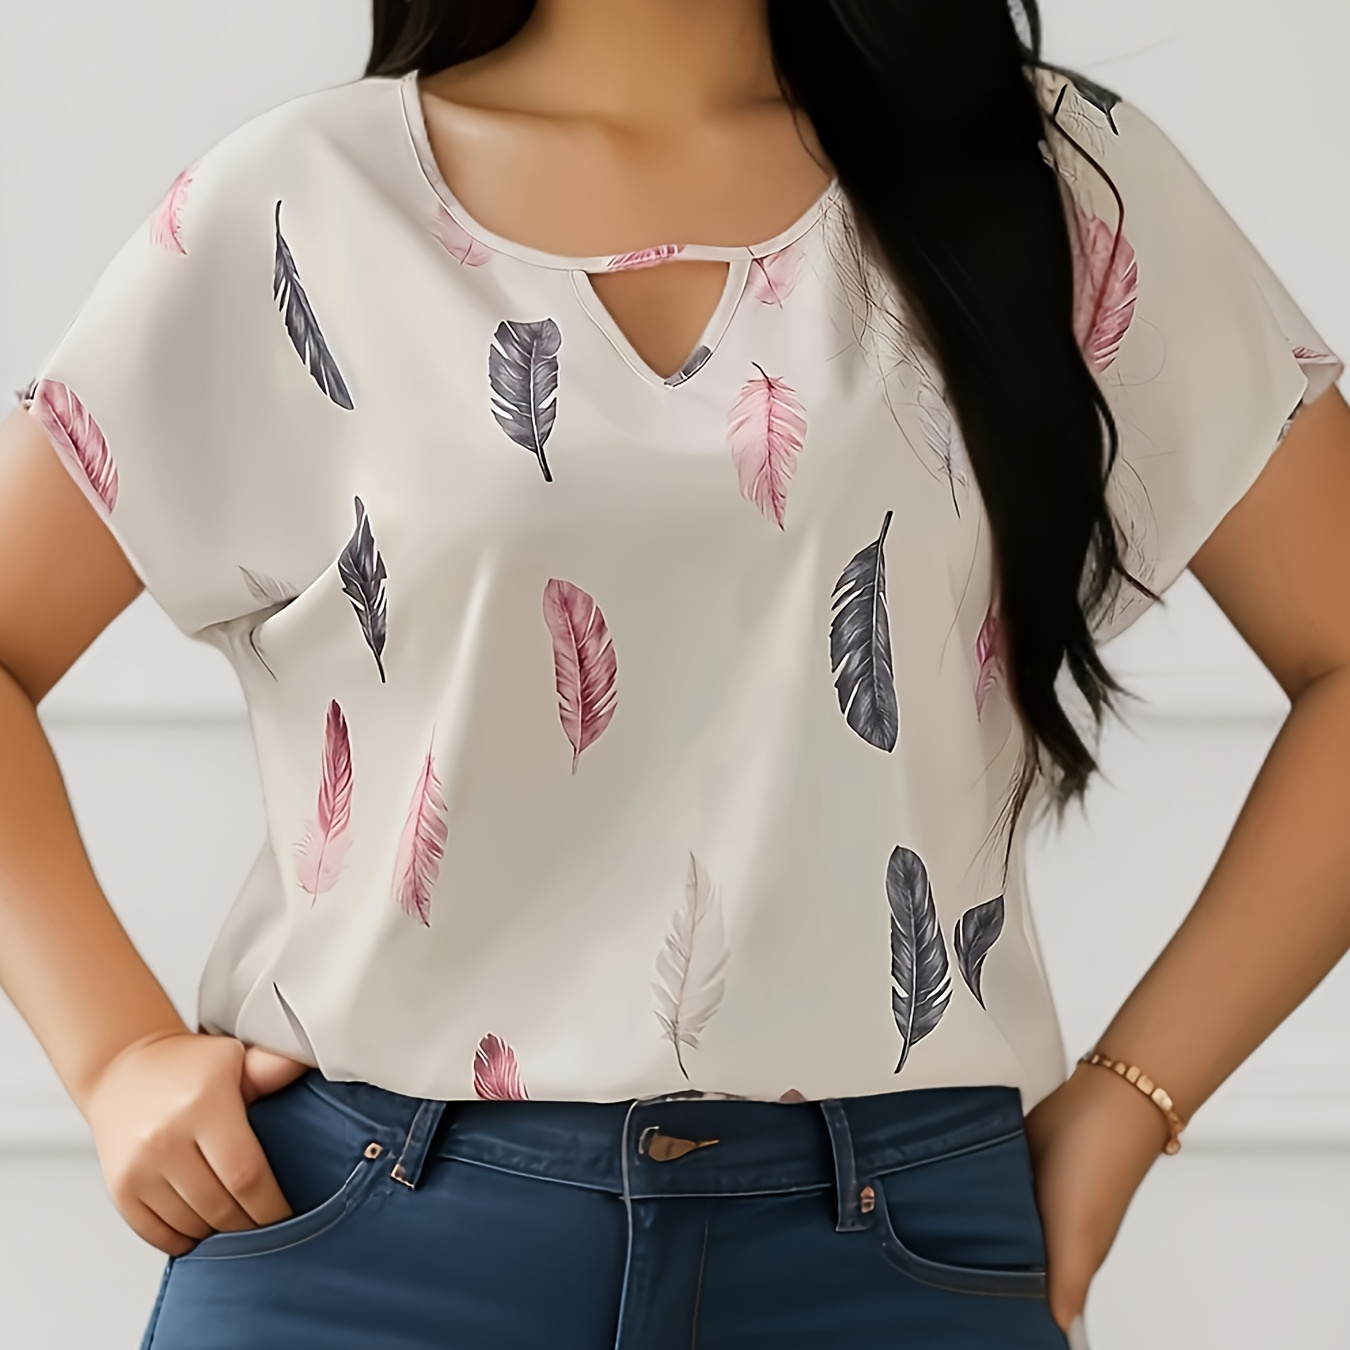 

Plus Size Feather Print Top, Casual Cut Out Short Sleeve Top For Summer, Women's Plus Size clothing